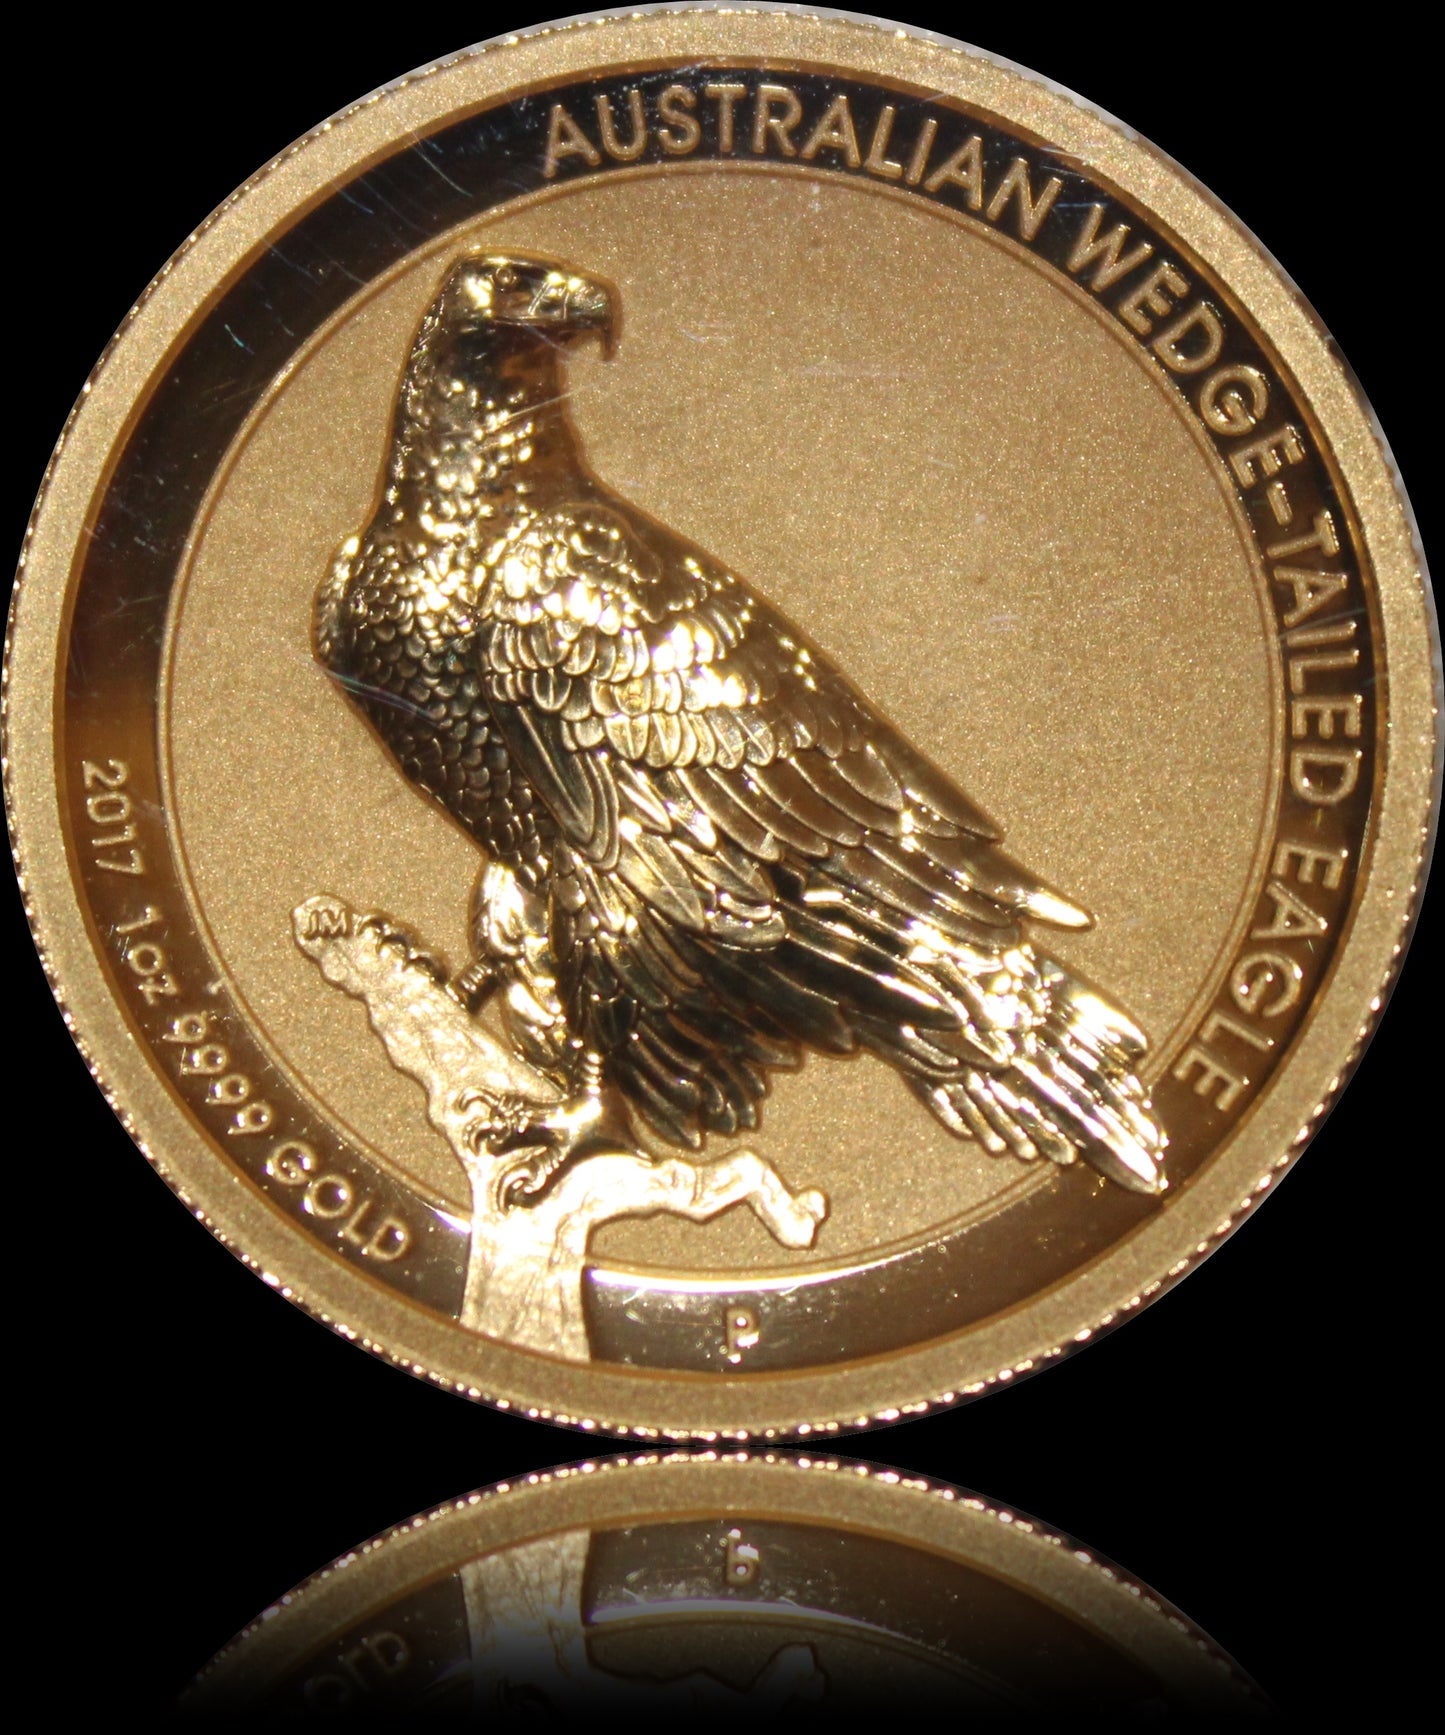 Wedge Tailed Eagle 2017, Series 1 oz Gold Wedge Tailed Eagle Proof PF70 $100, 2017